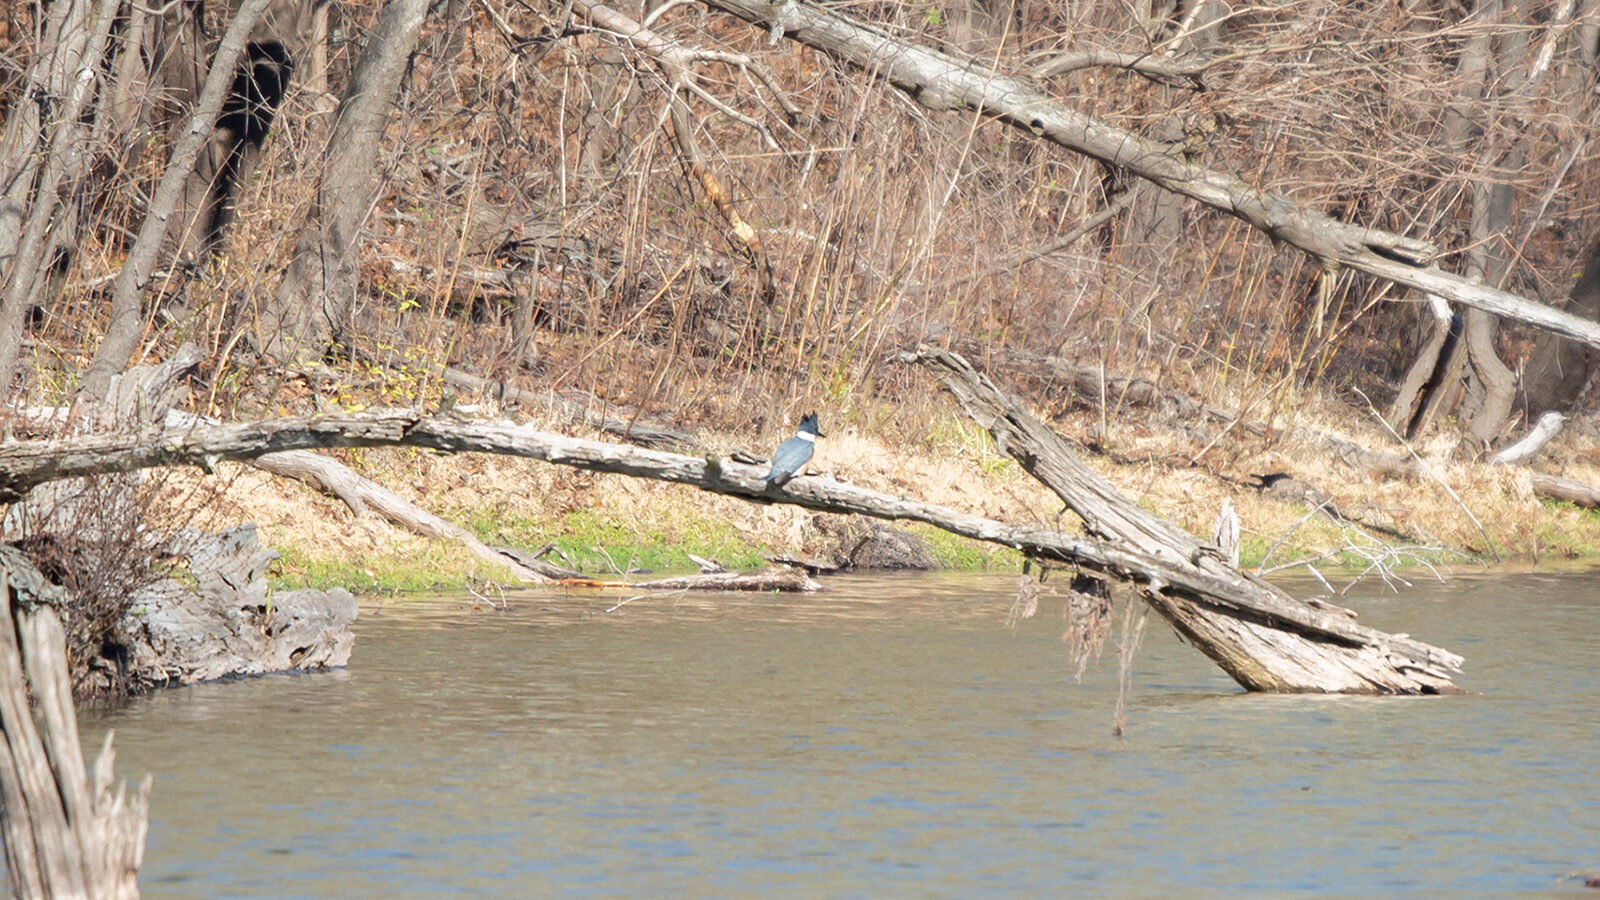 Belted kingfisher perched on a limb over water